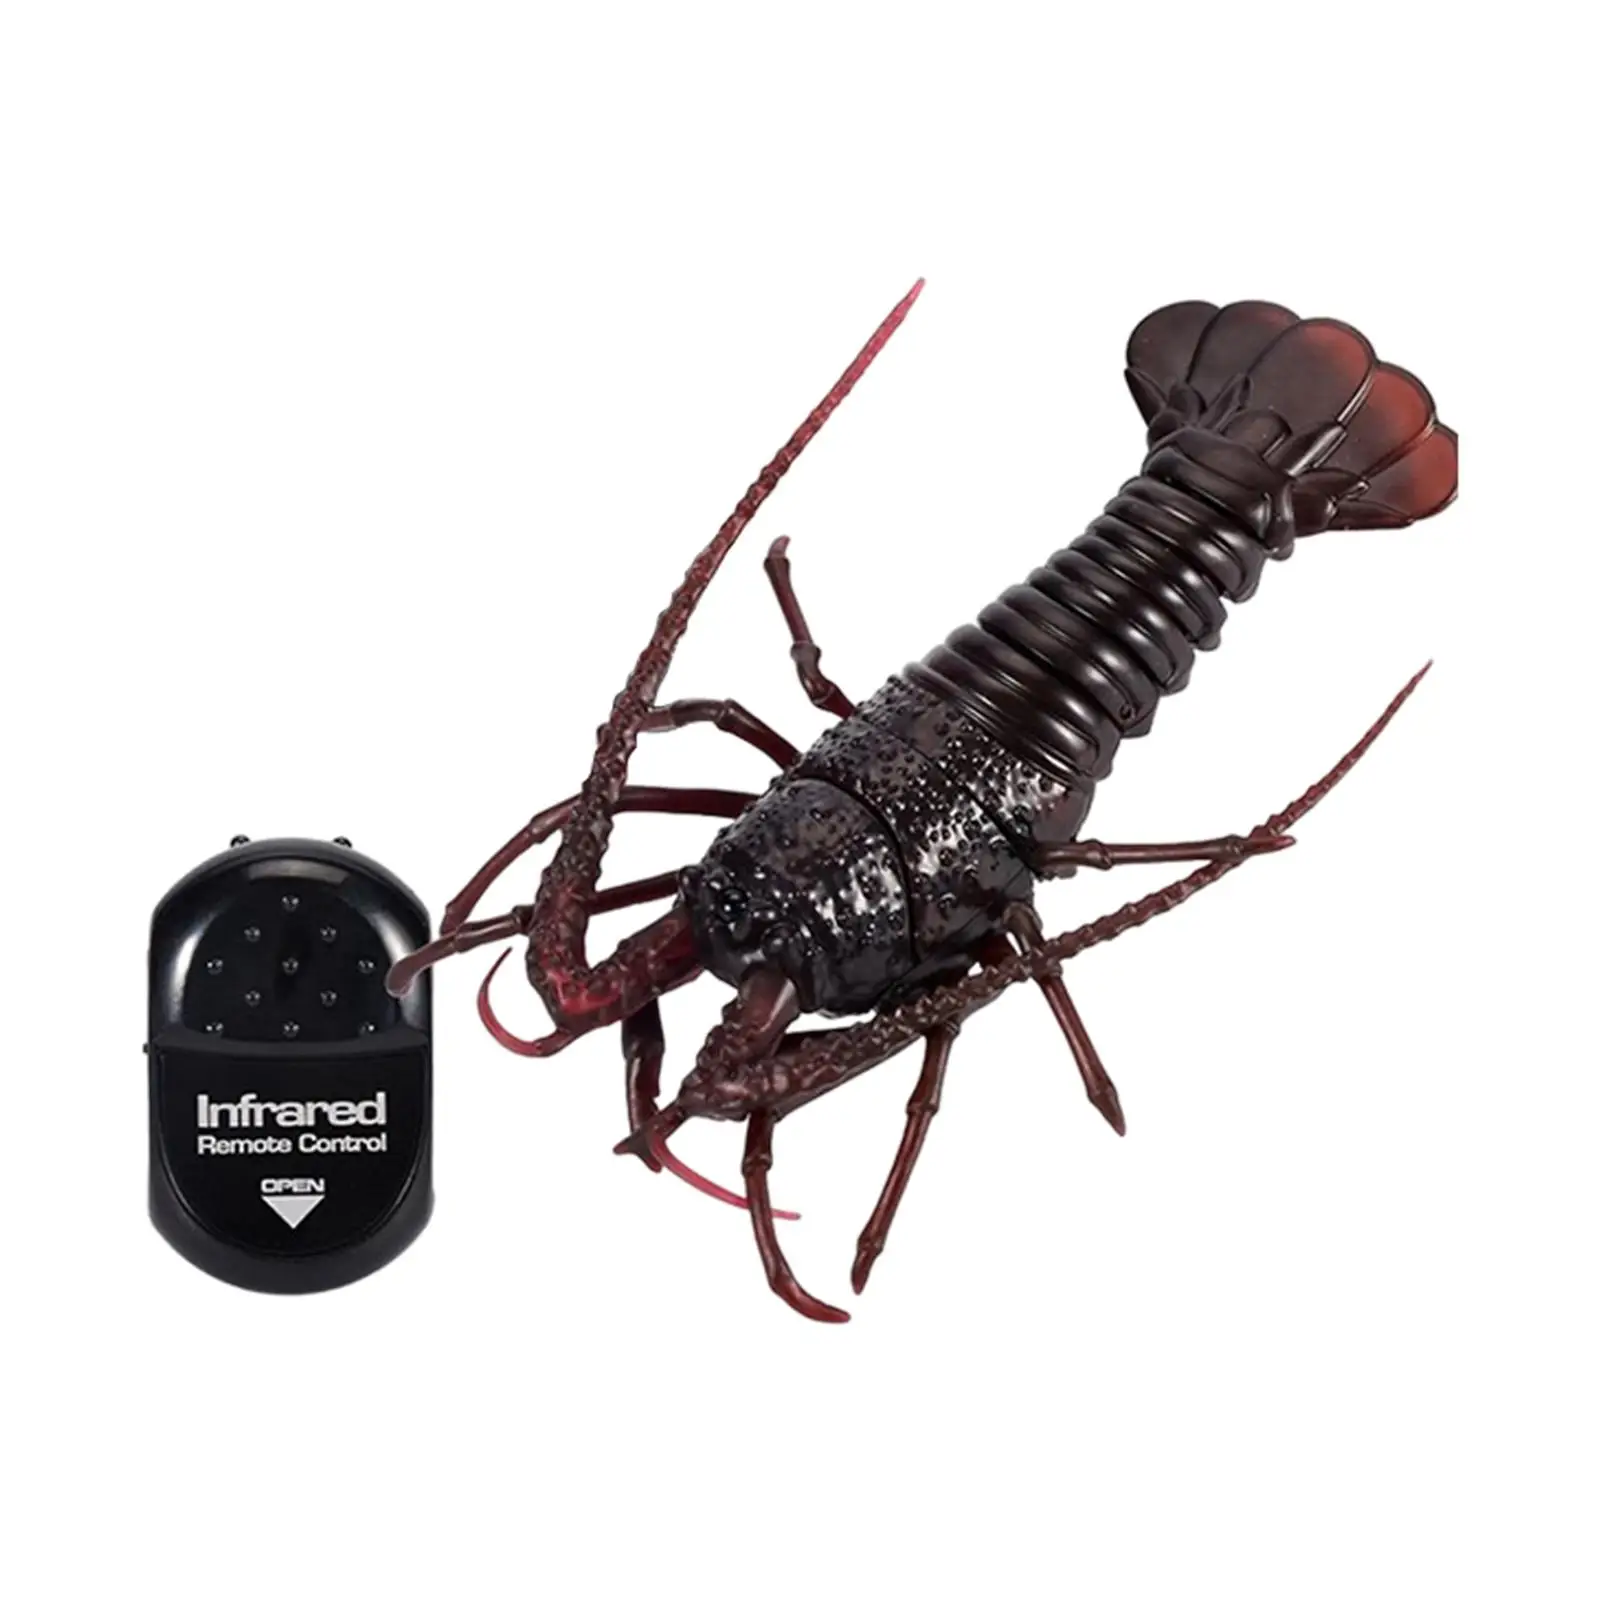 Simulation RC Crawfish Realistic Remote Control Vehicle Car Animal Joke Toys Electric Infrared RC Shrimp for Children Kids Gifts